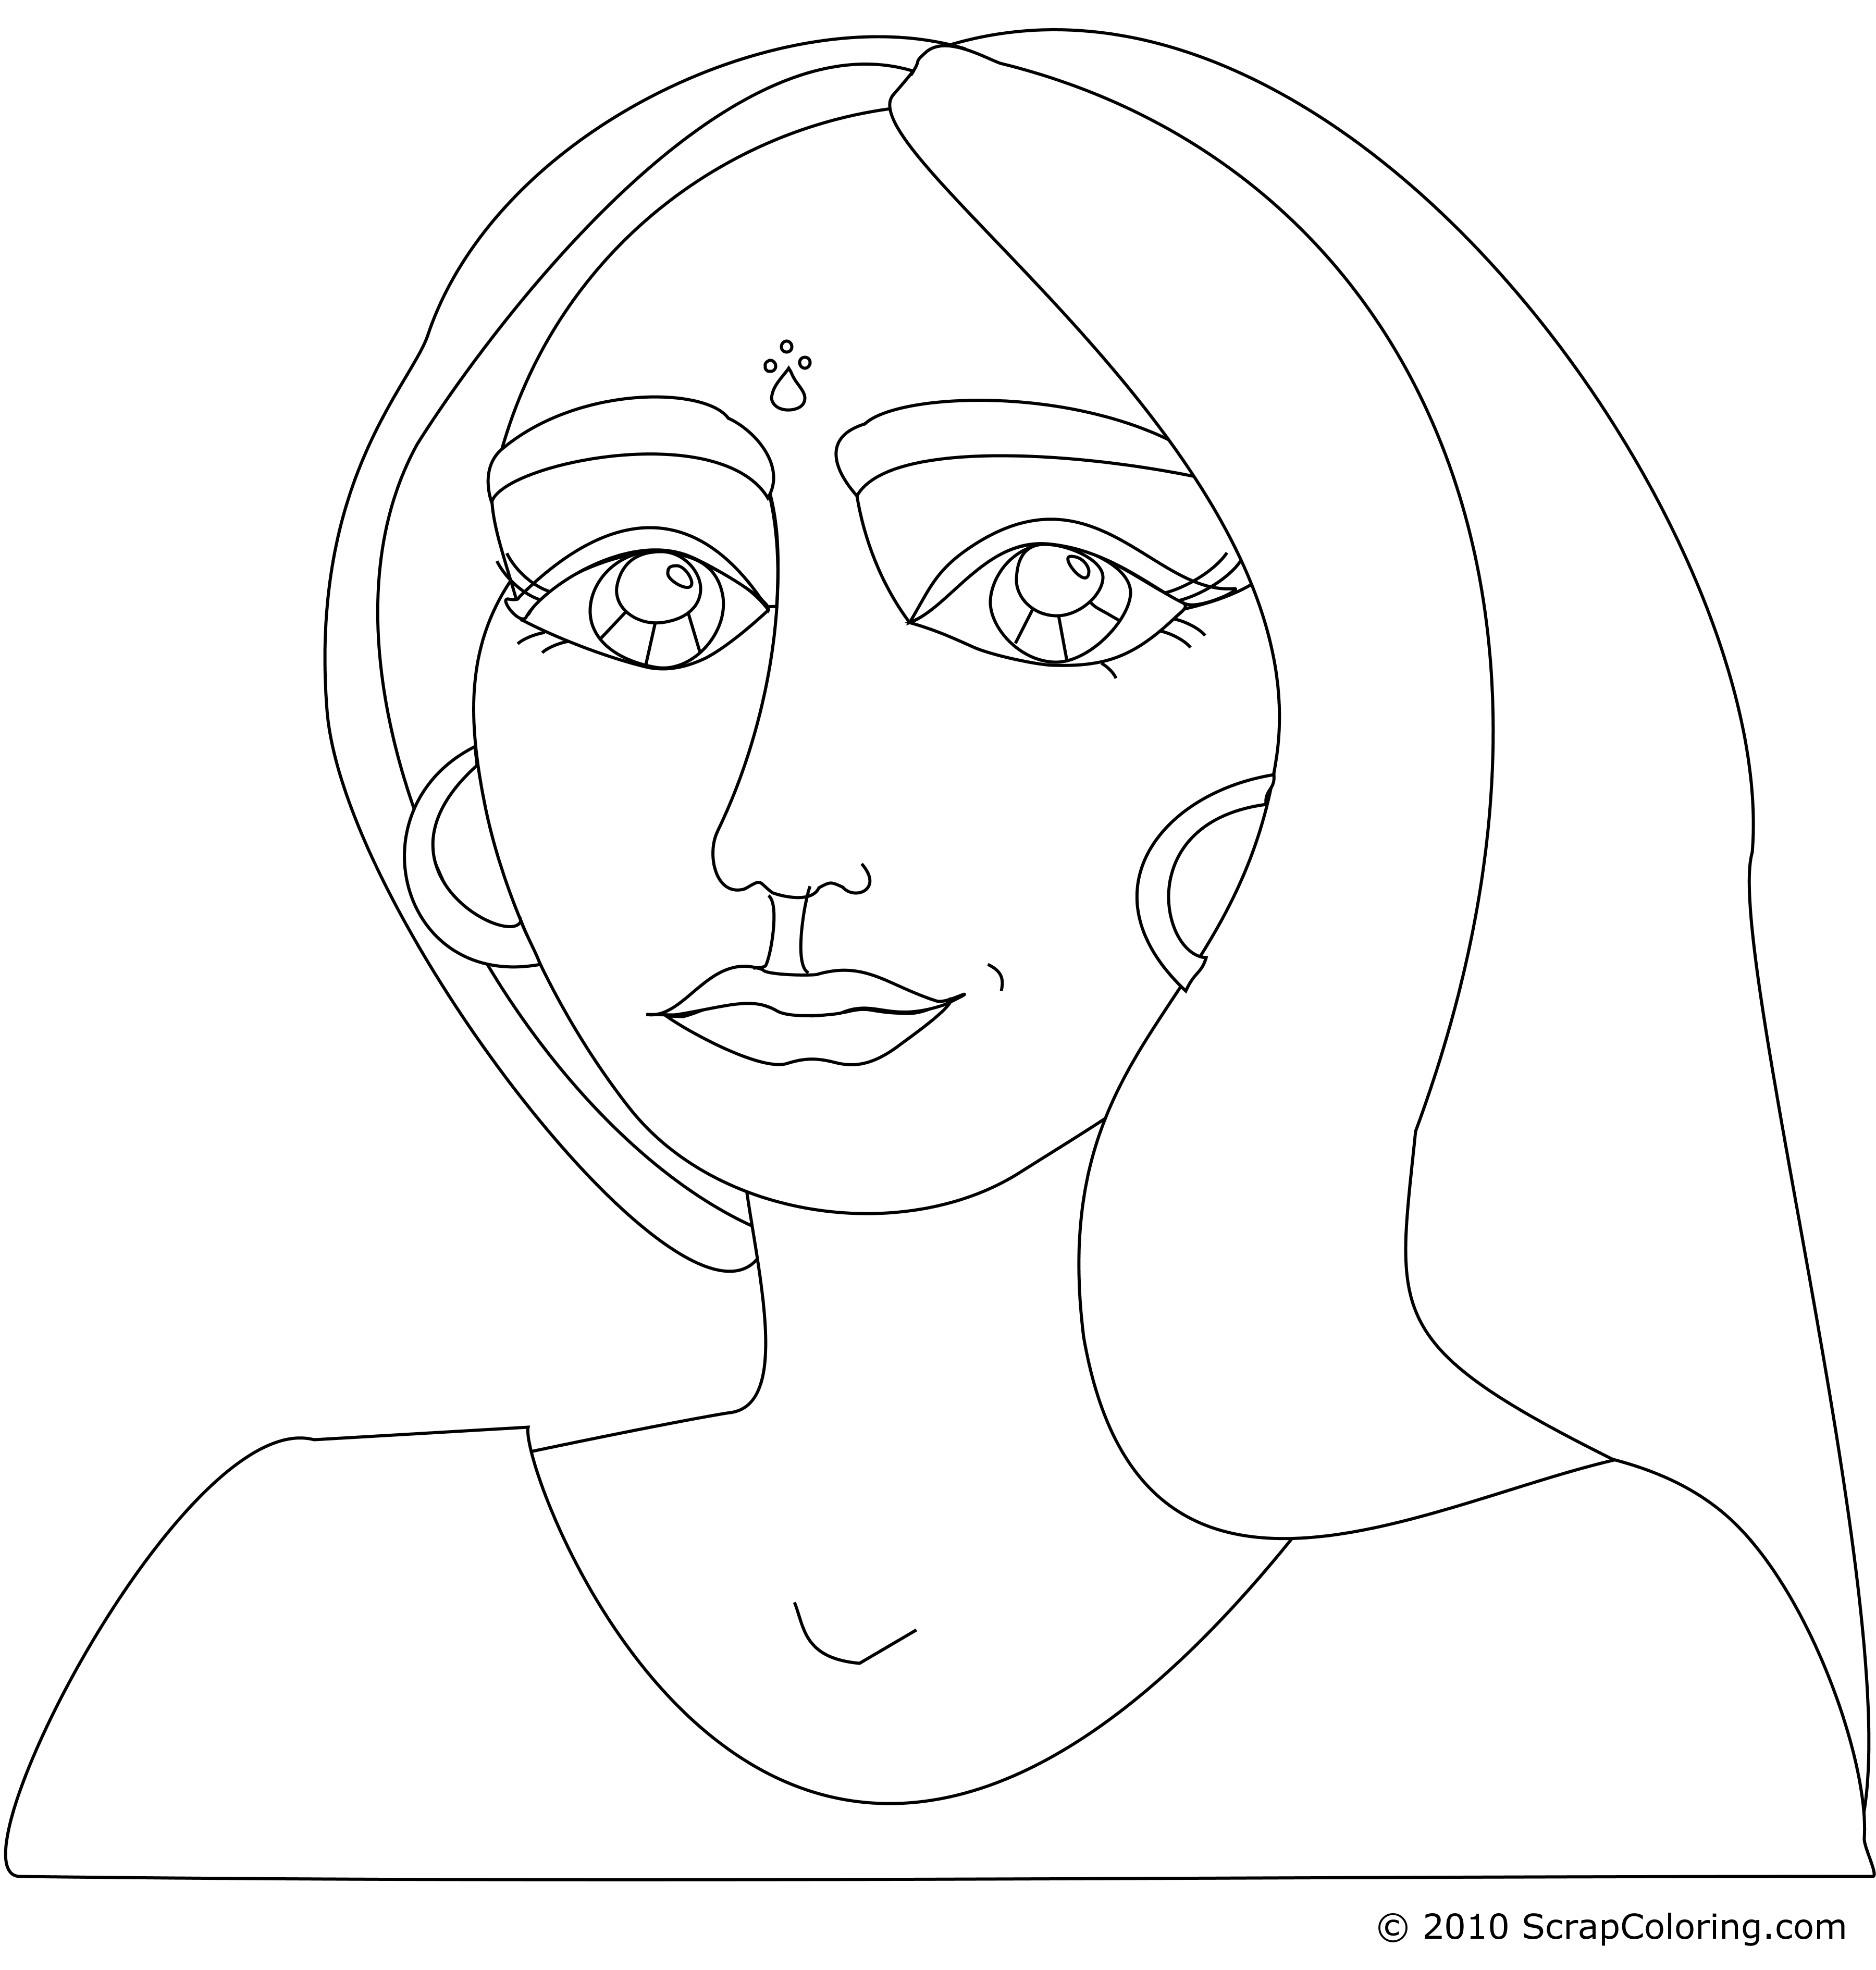 6 Pics of Indian Girl Face Coloring Page - Indian Woman Coloring ...